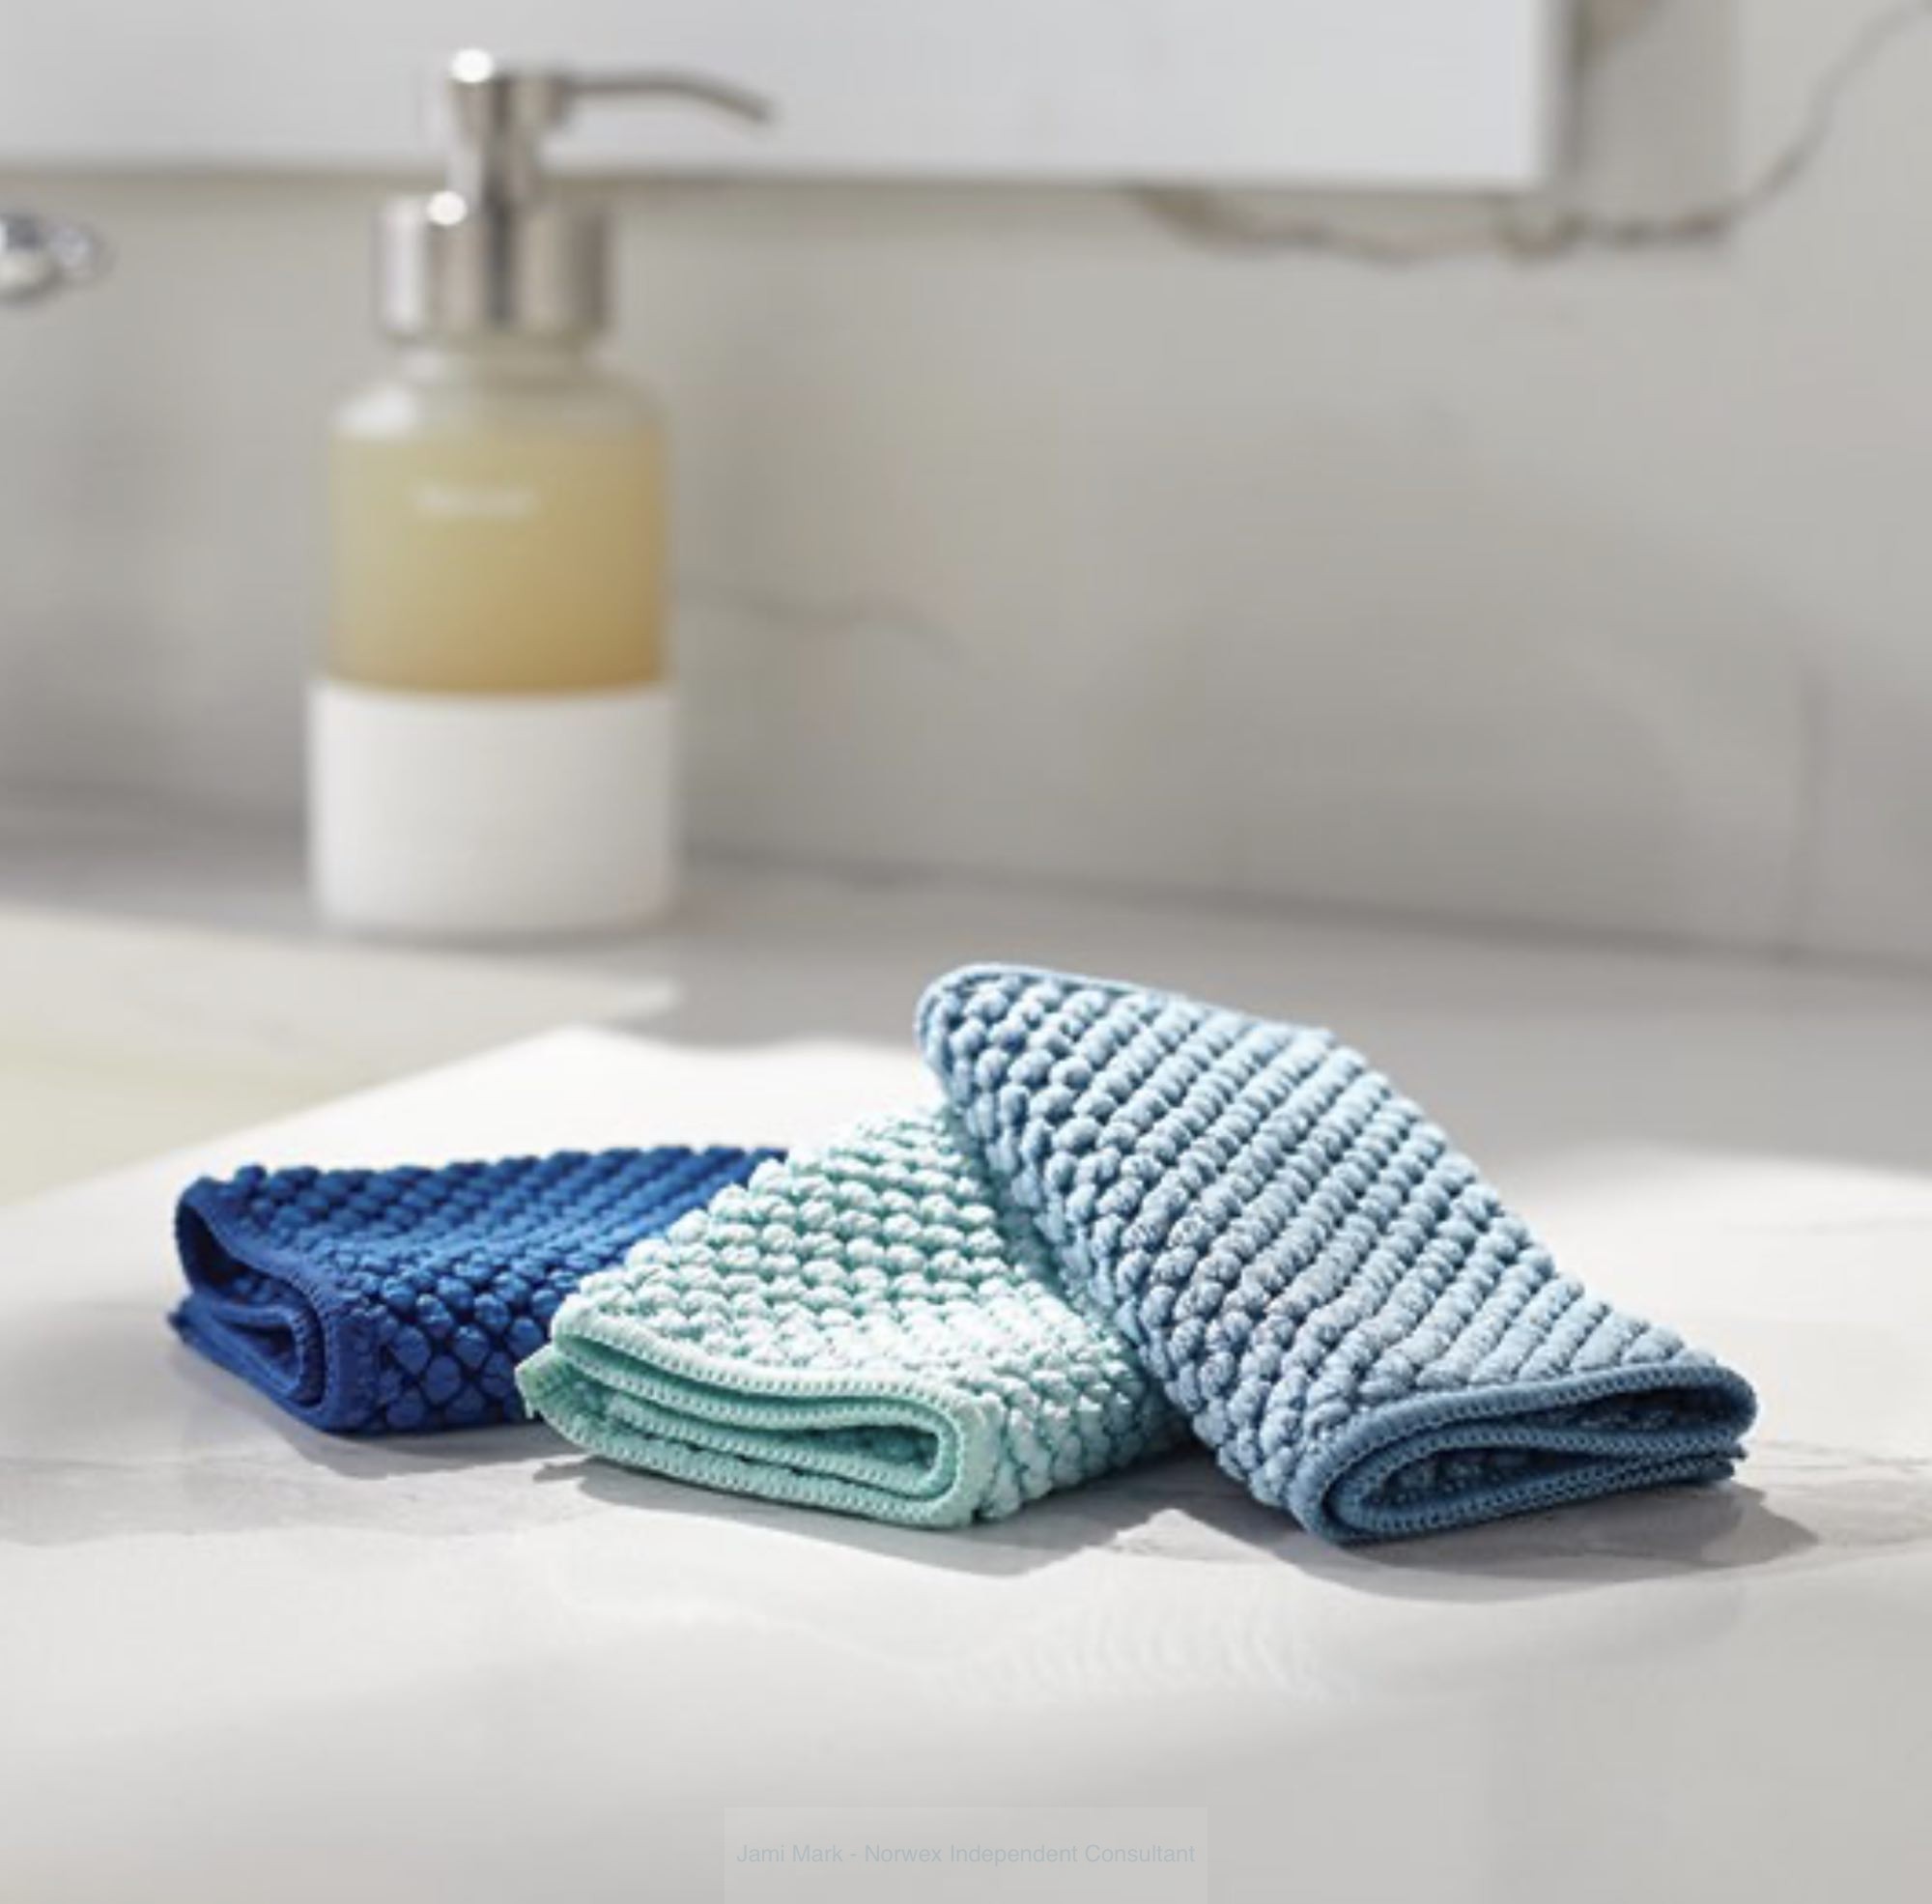 Norwex Counter Cloths - Everything You Need To Know